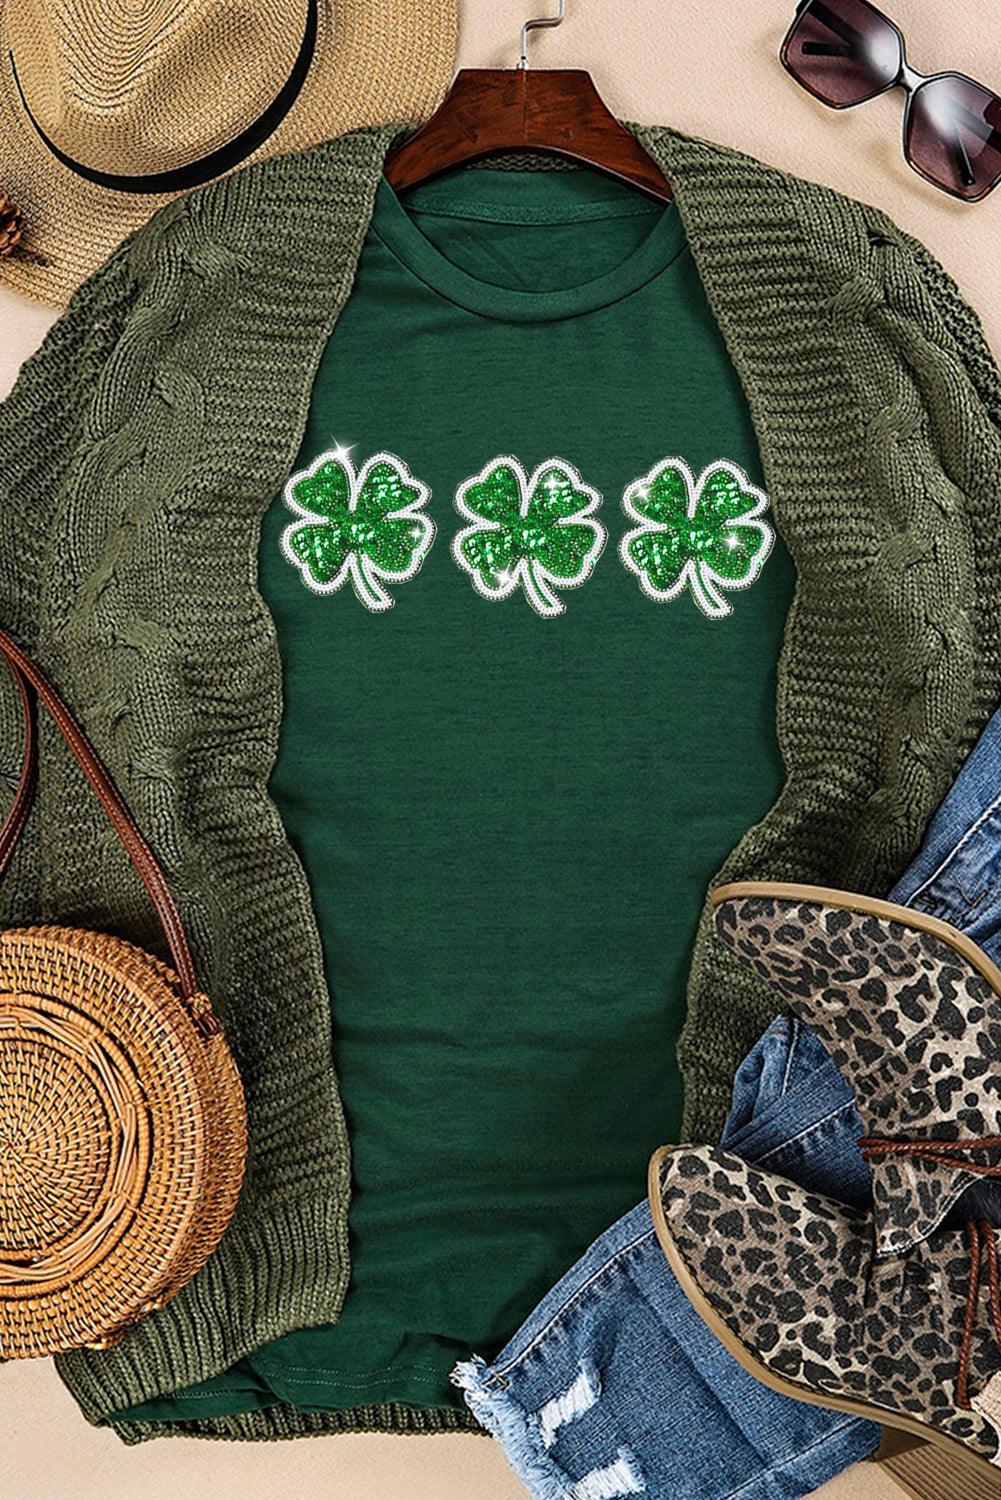 Green St Patrick Clover Patch Sequin Graphic T Shirt - Ninonine